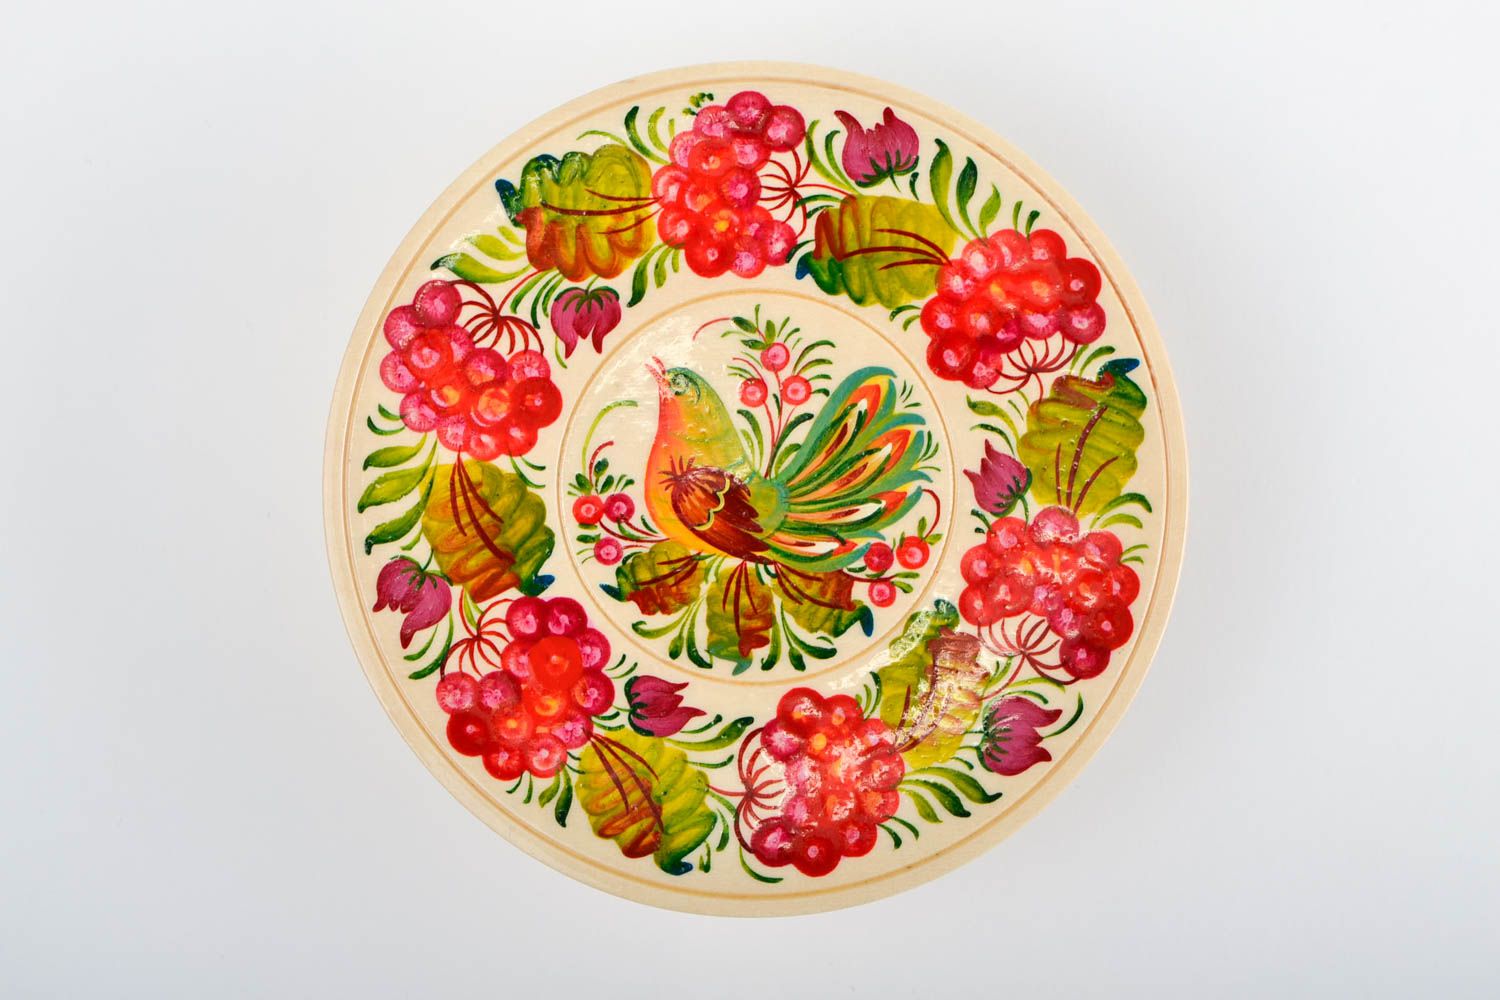 Handmade wooden plate for decorative use only folk art painted plate gift ideas photo 4